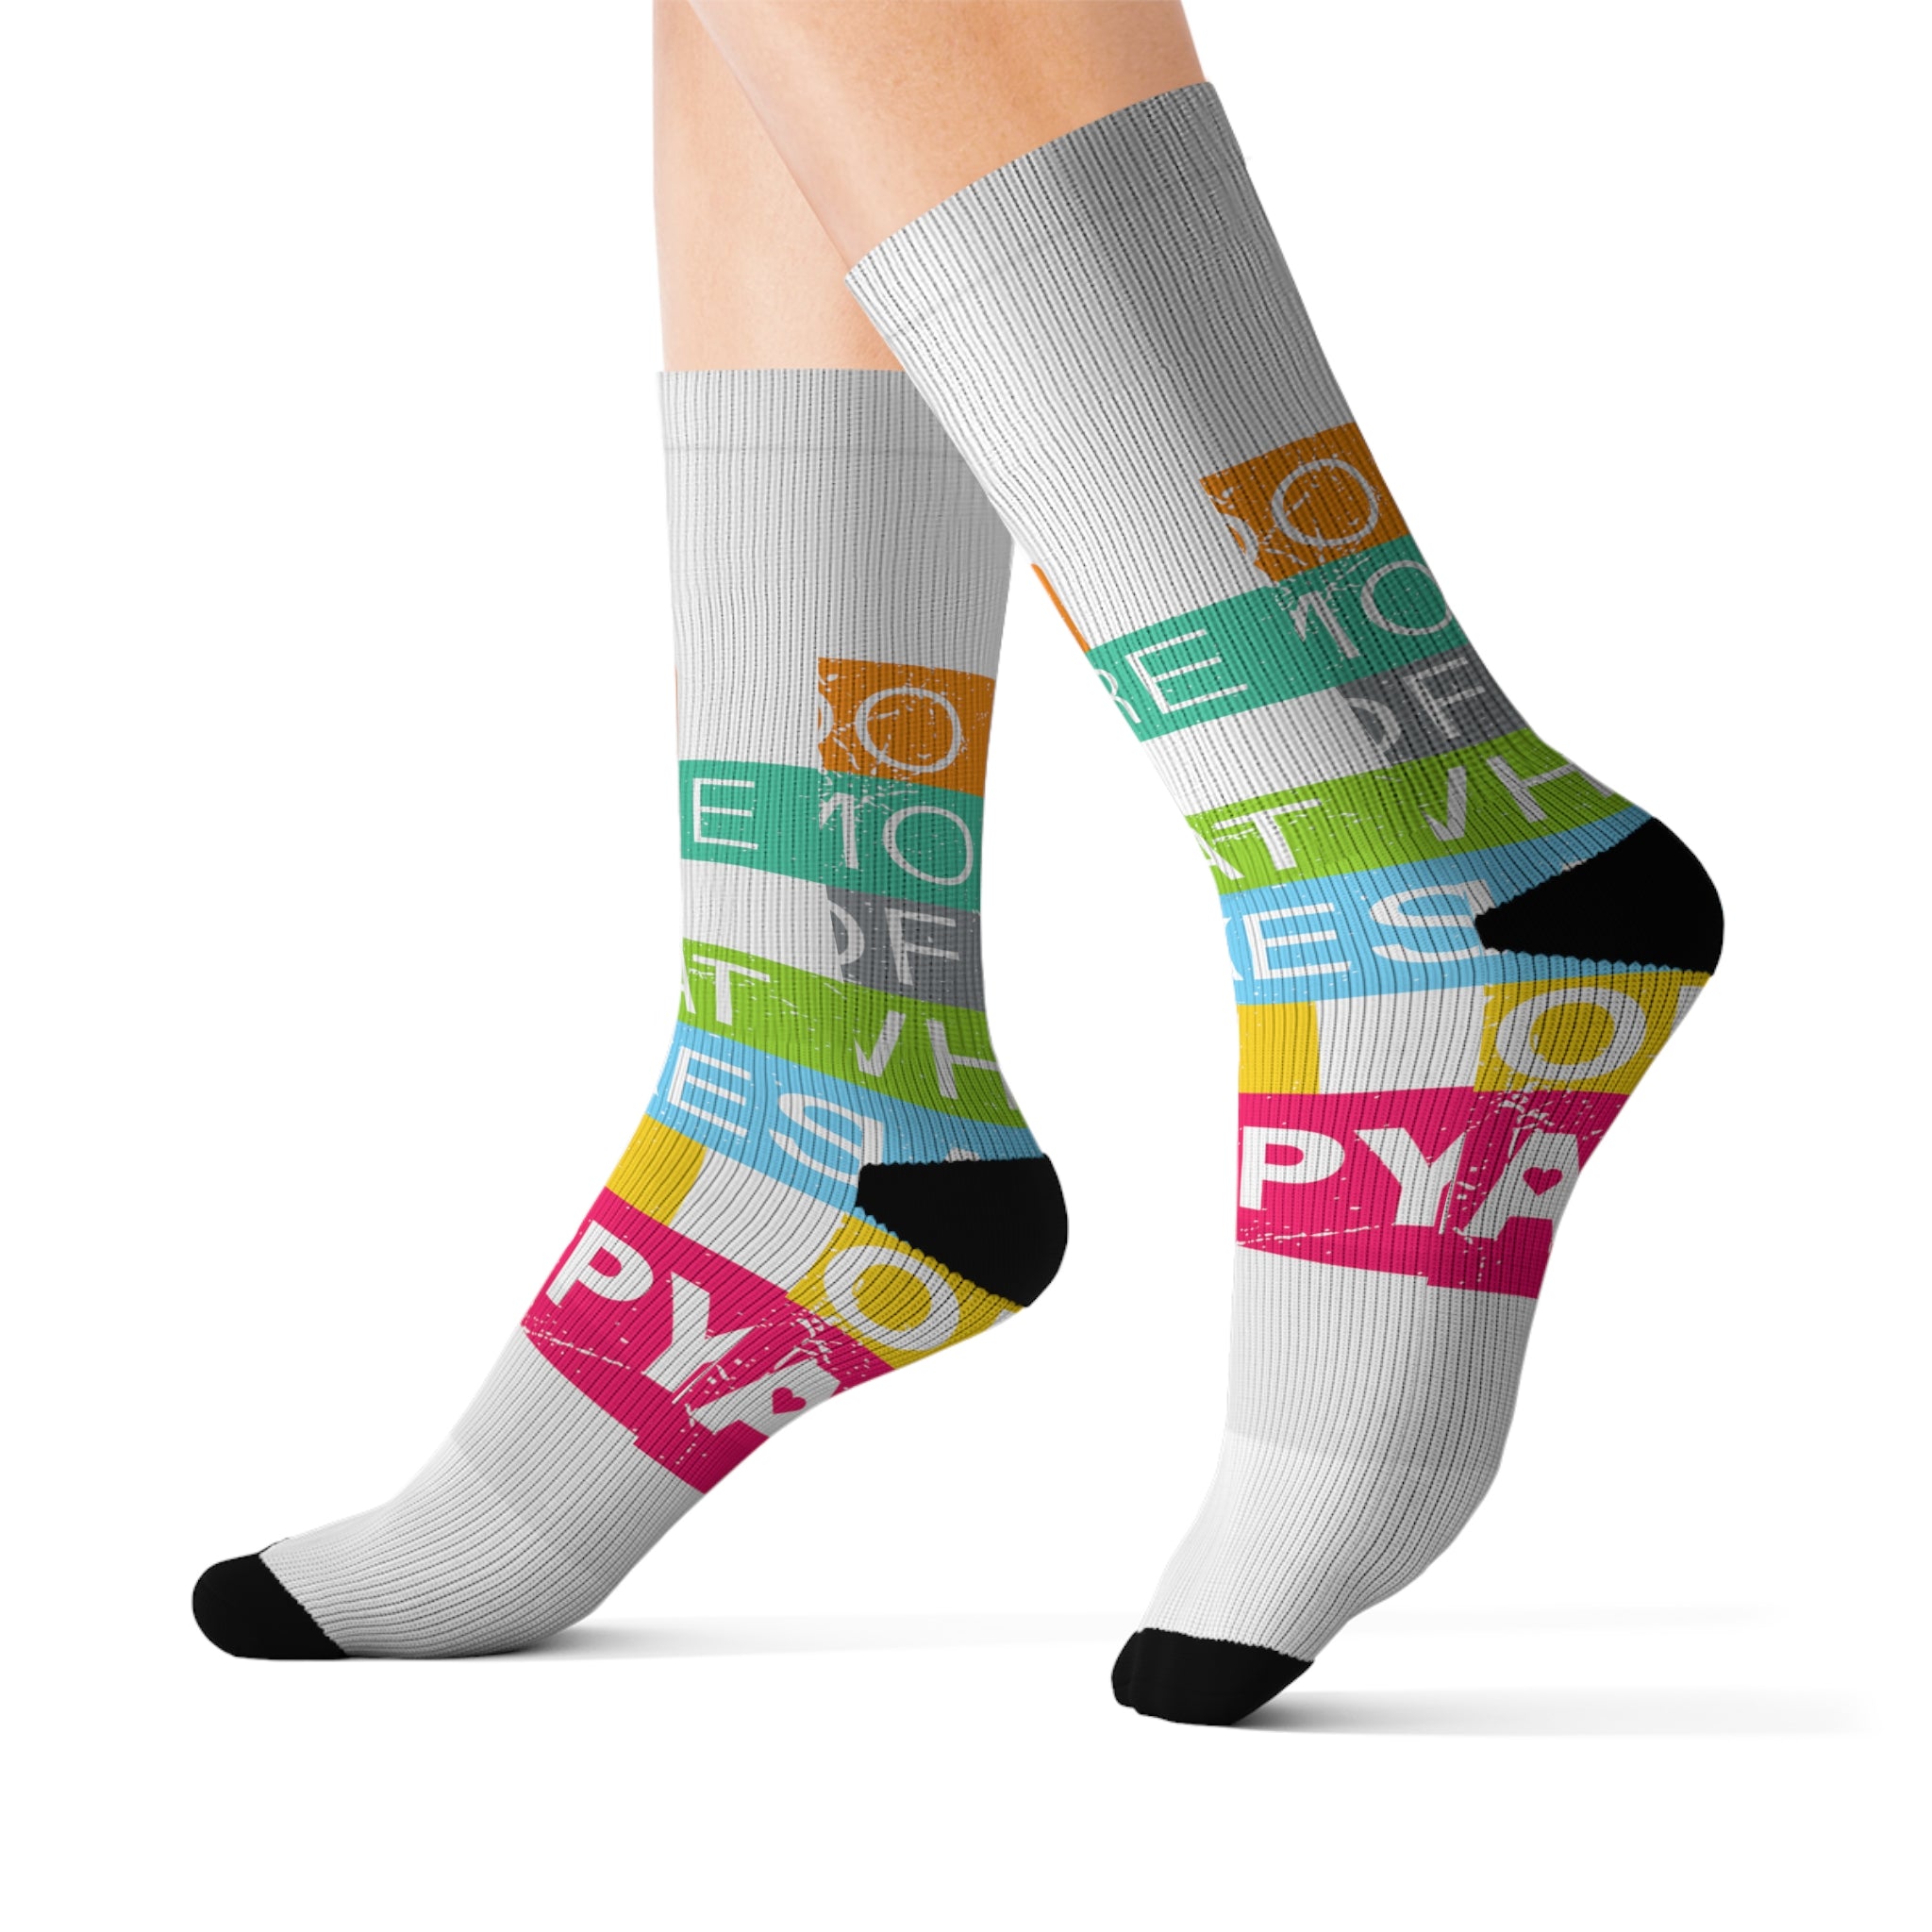 Do More of What Makes You Happy - Socks